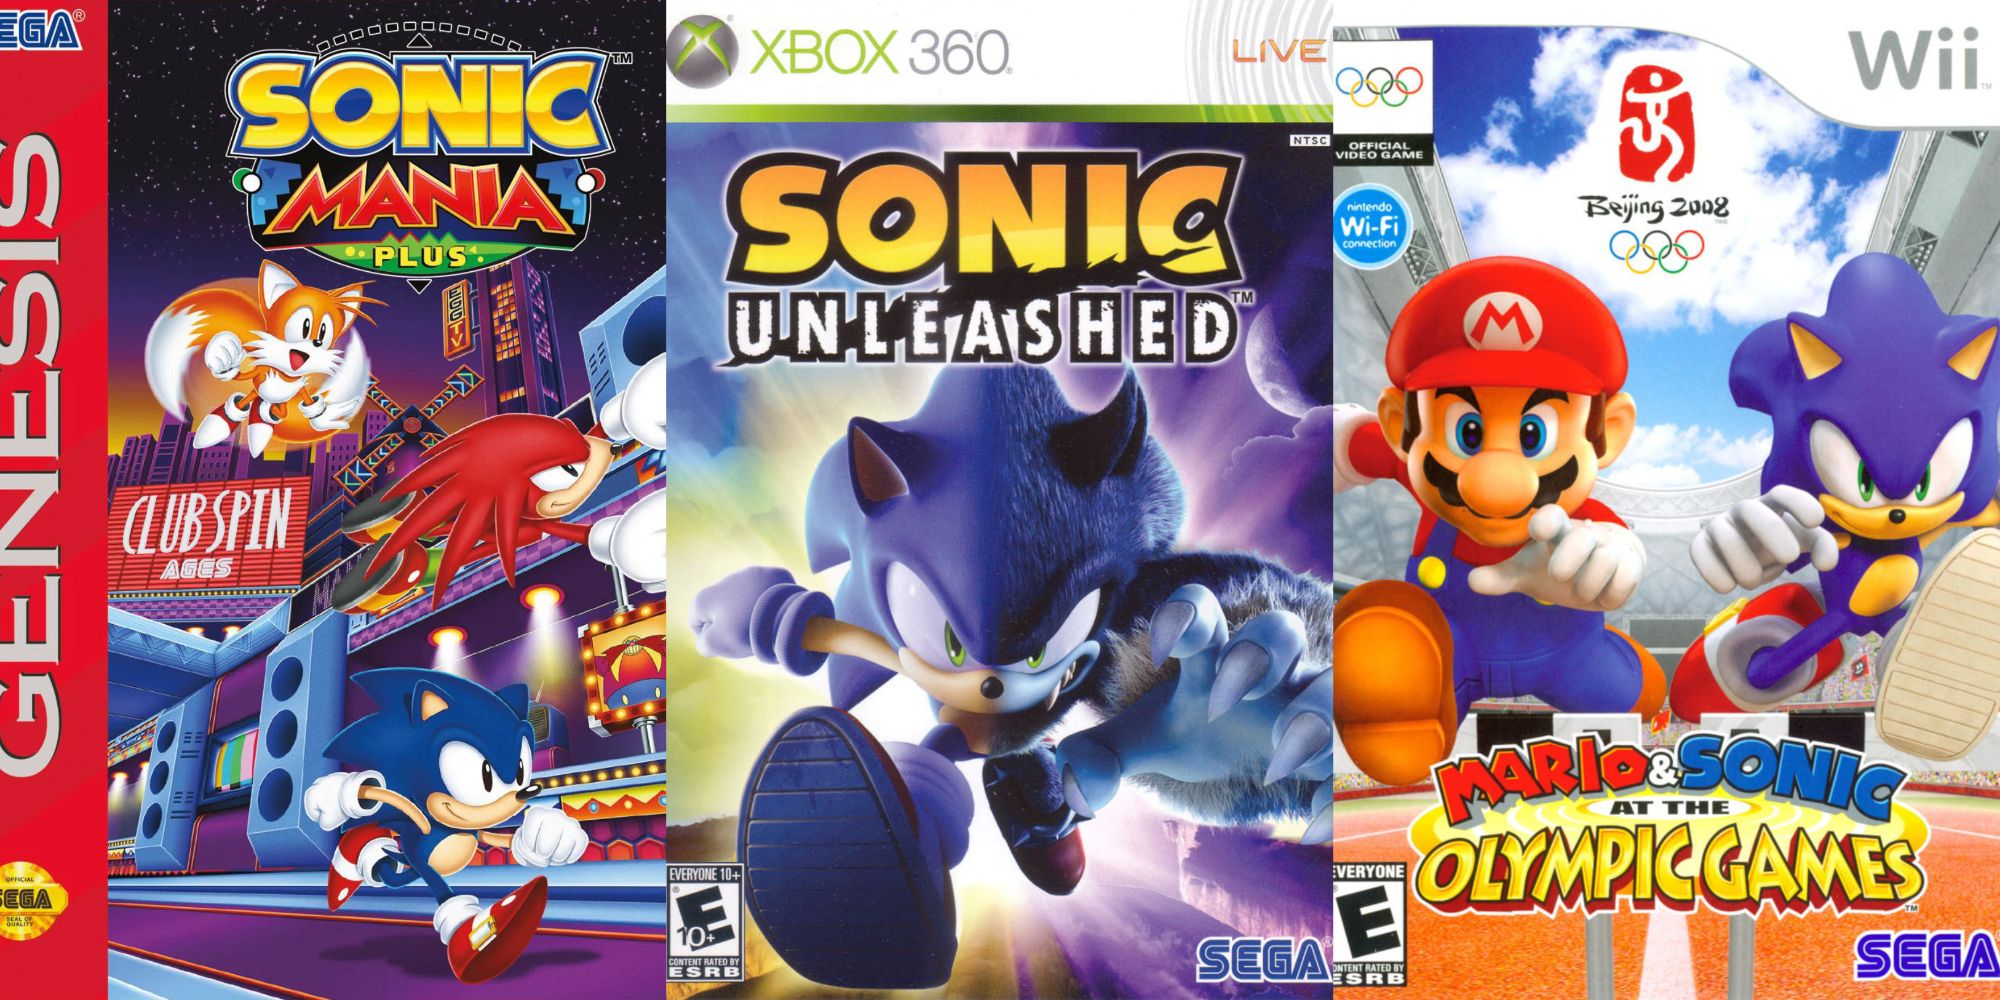 Split image of Sonic the Hedgehog game covers, including Sonic Mania Plus, Sonic Unleashed, and Mario & Sonic at the Olympics 